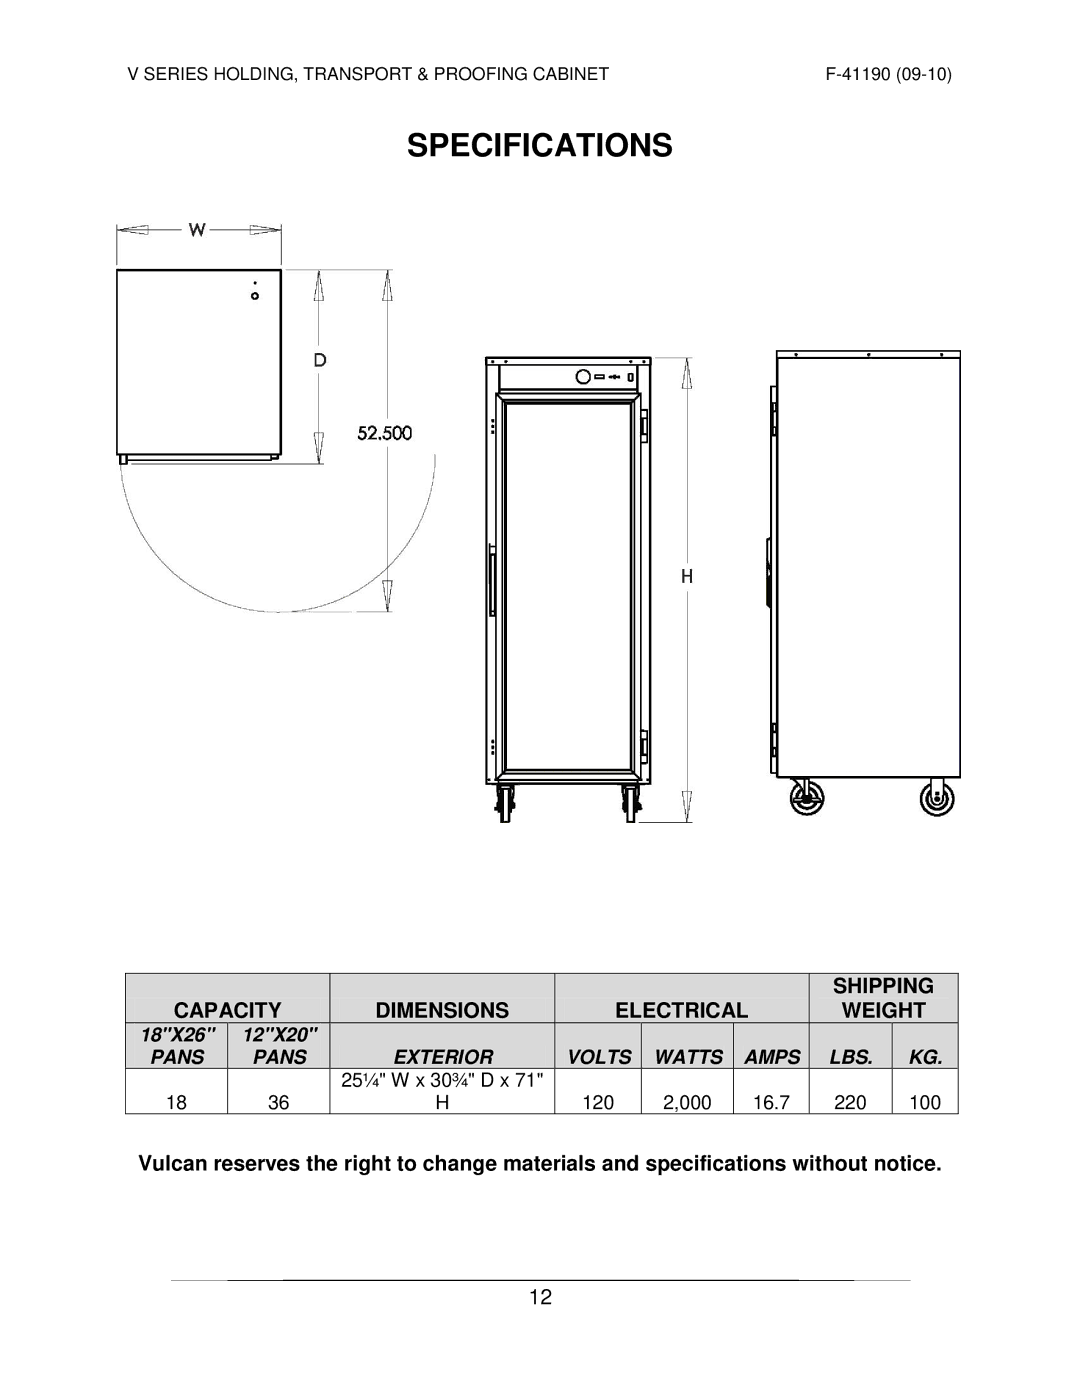 Vulcan-Hart VP18 ML-138089 operation manual Specifications, Capacity Dimensions Electrical Weight 